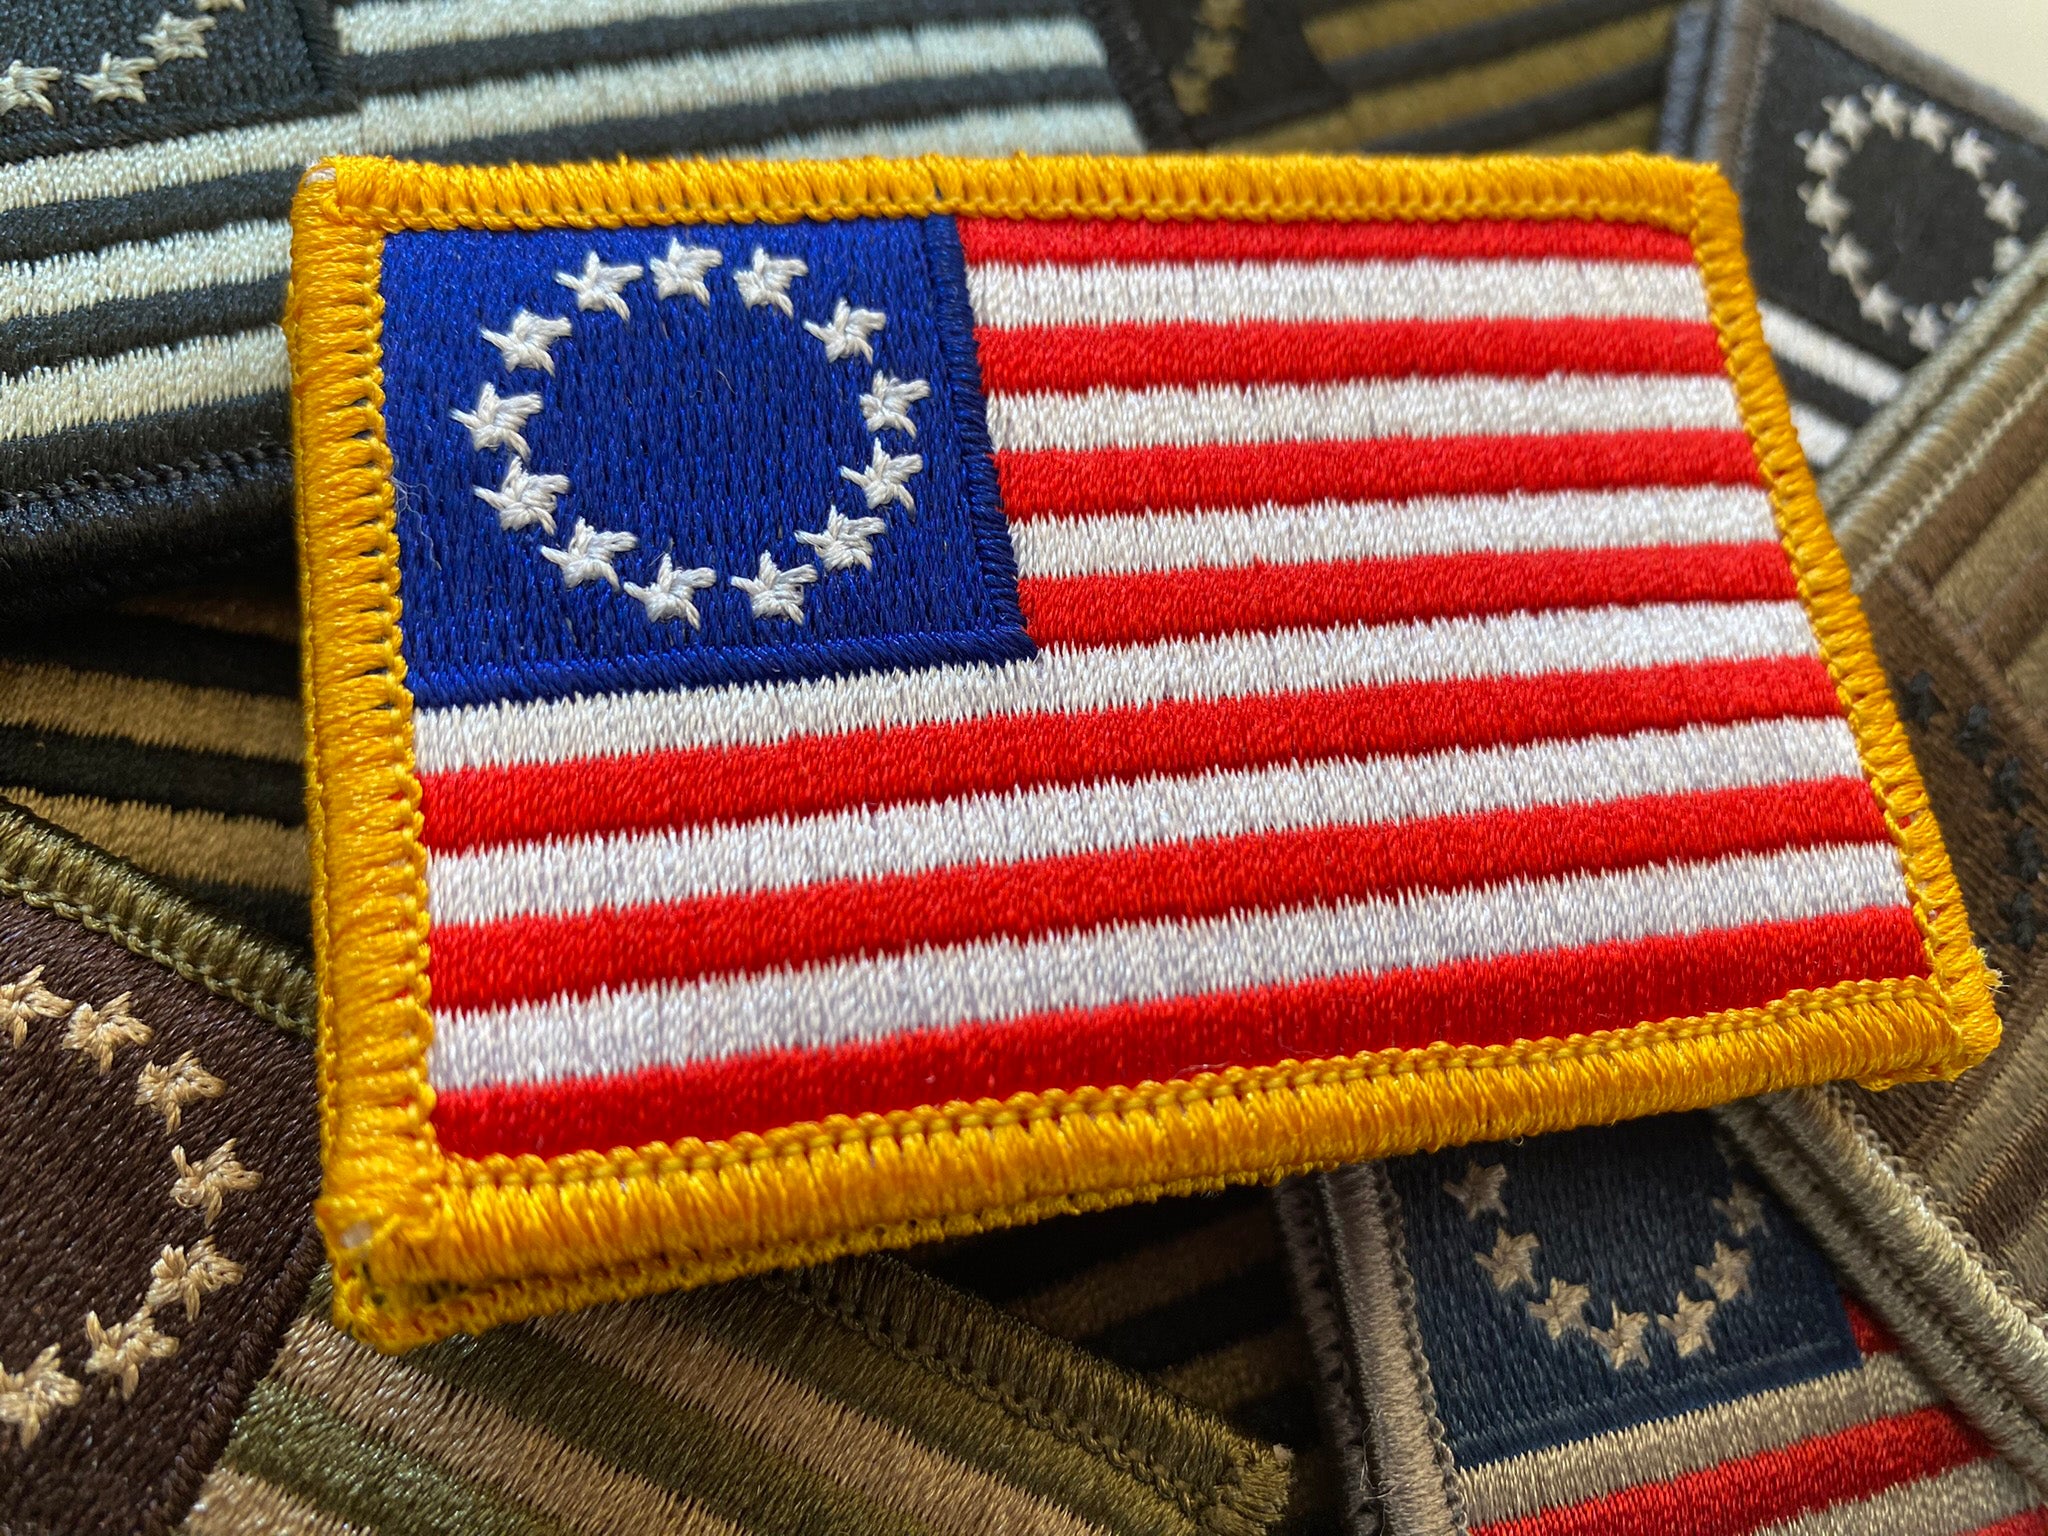 2"x3" Betsy Ross Tactical Patches